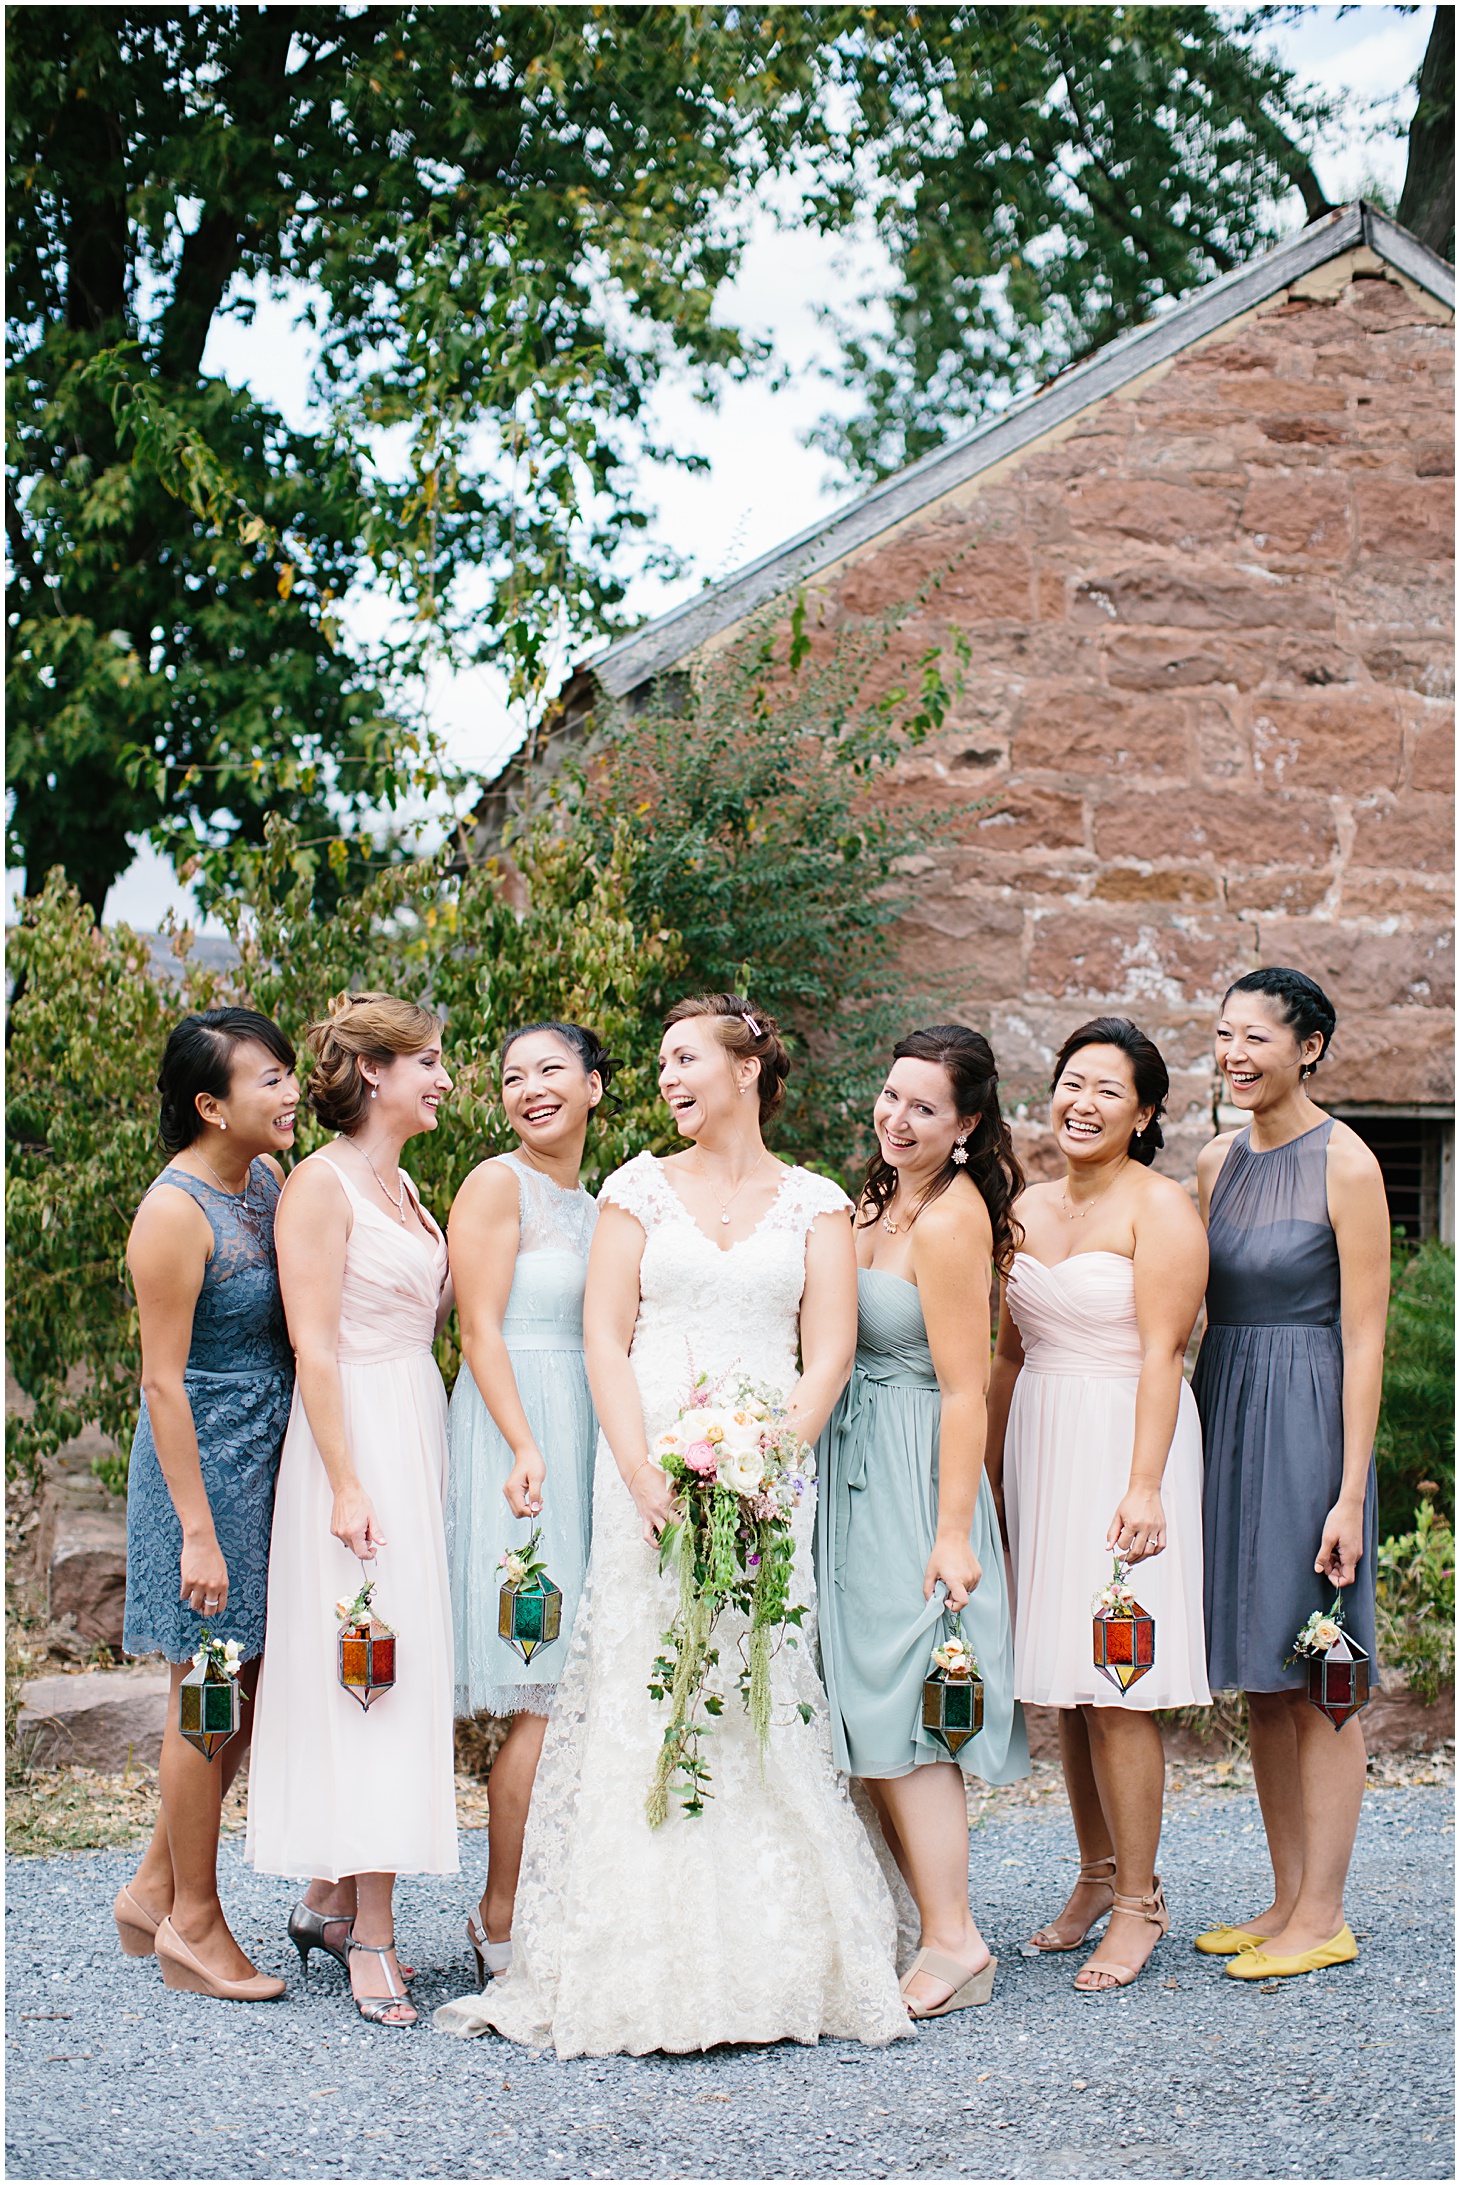 Rustic Floral Wedding at Rocklands Farm & Winery by Sarah Bradshaw Photography_0016